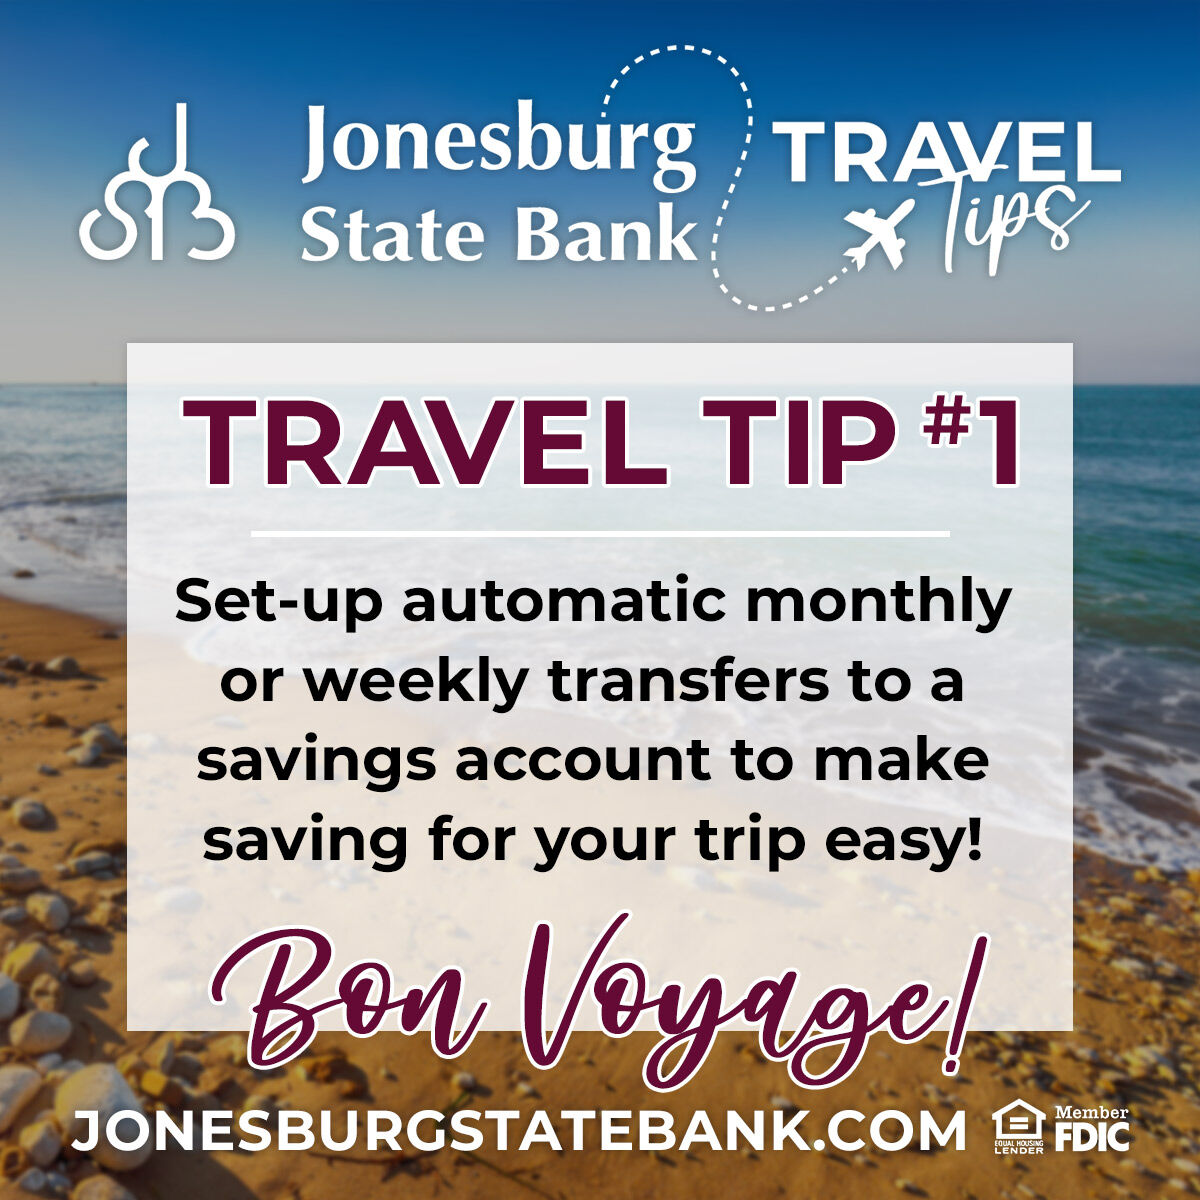 🌟 Planning your dream trip? Set up automatic transfers to your savings account! 🌟 Whether it's monthly or weekly, automating your savings makes reaching your travel goals a breeze. ✈️💼 #TravelTip #SmartSaving #BonVoyage

Learn more at bit.ly/2y7SJZq